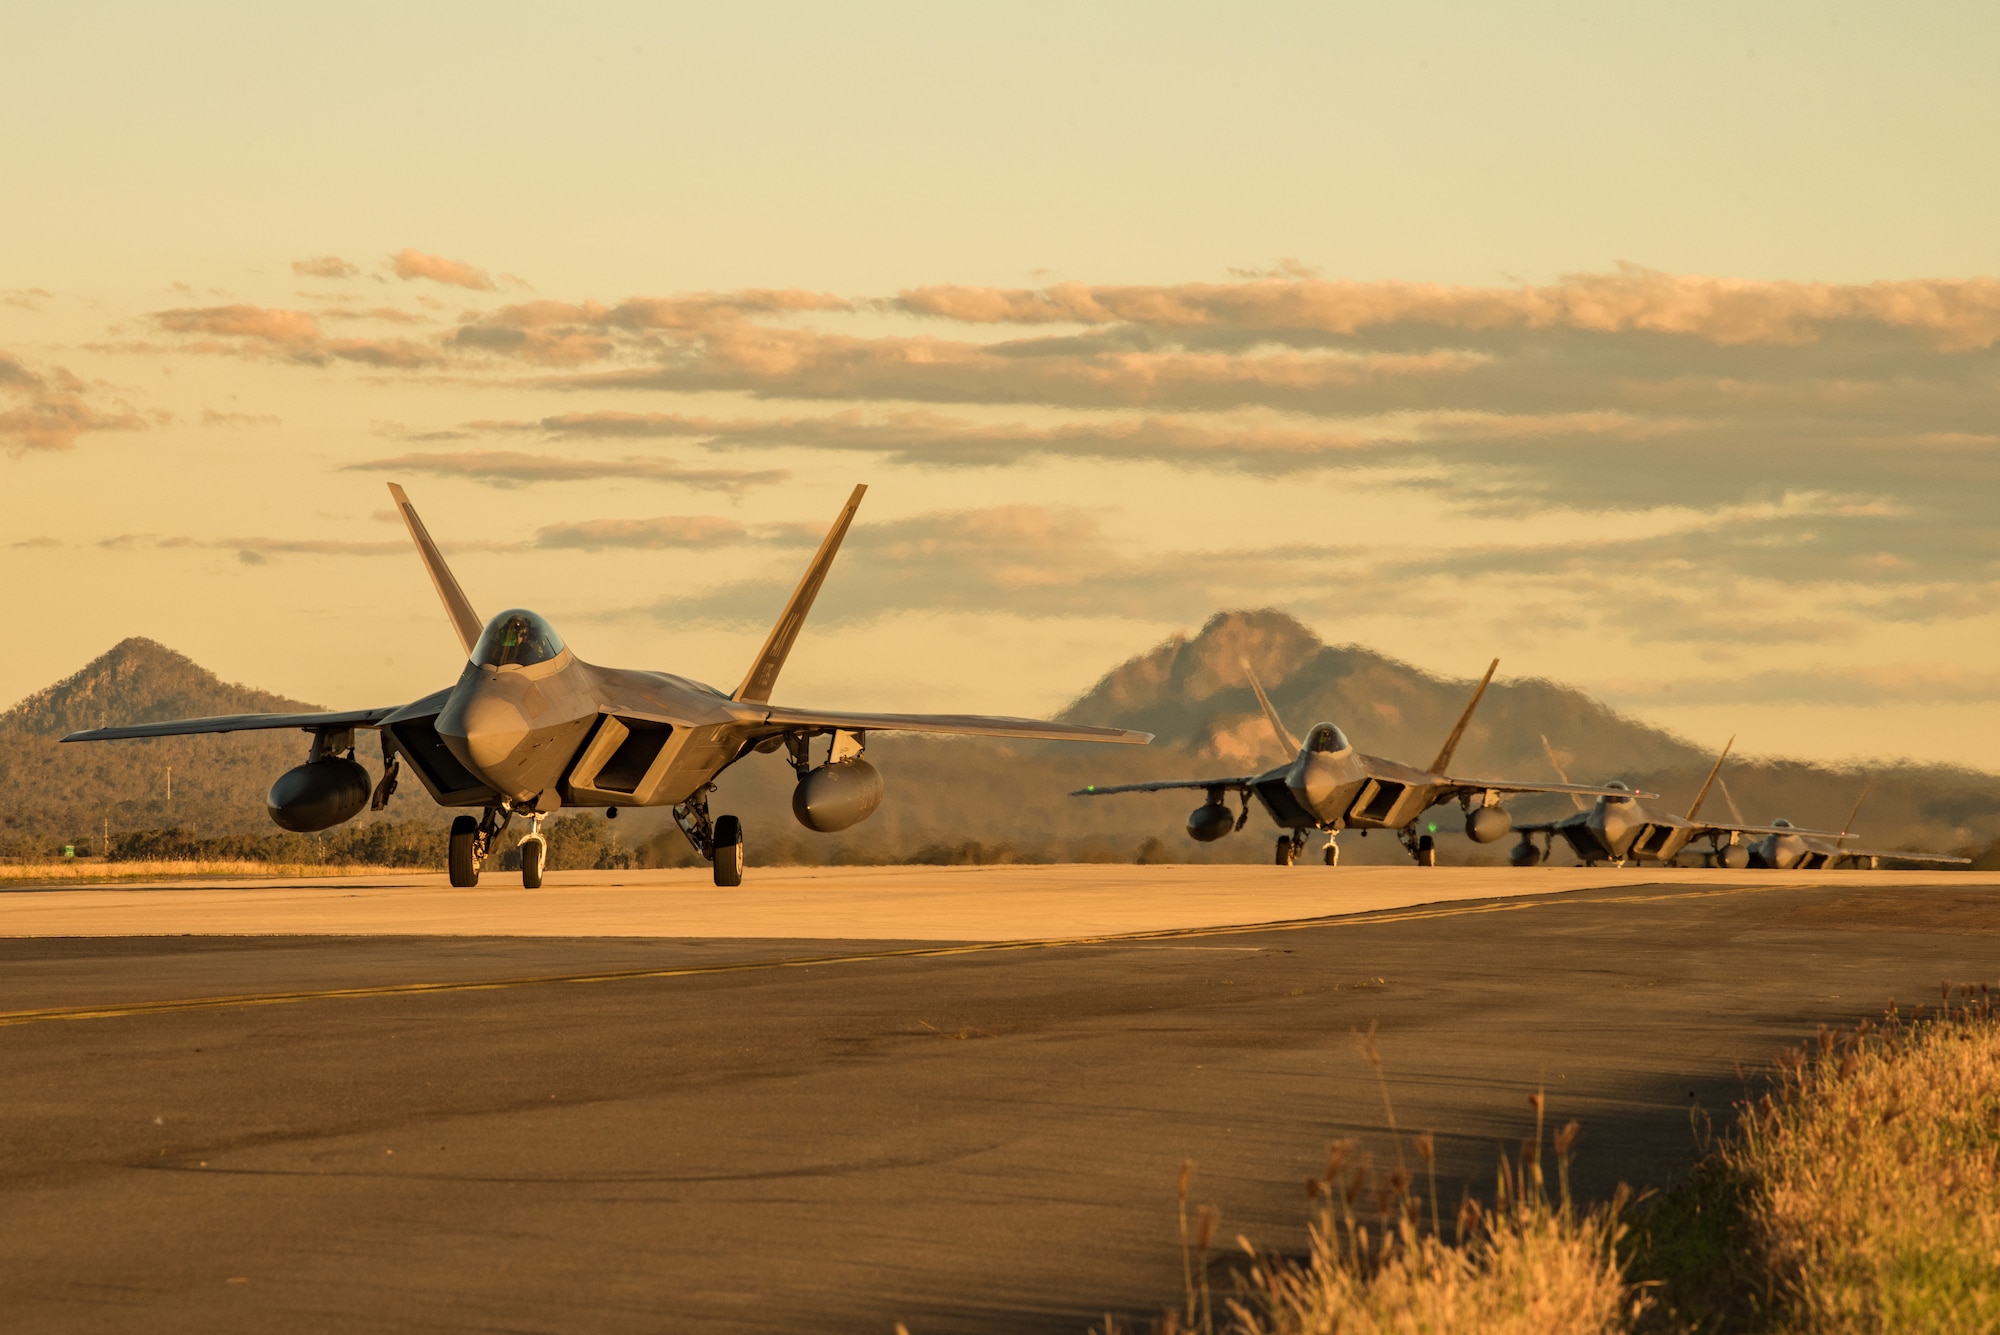 F-22 Raptors assigned to the 90th Fighter Squadron, Joint Base Elmendorf-Richardson, Alaska, taxi to their parking location at the Royal Australian Air Force Base Amberley flightline for Talisman Sabre 19, July 9. Talisman Sabre provides effective and intense training to ensure U.S. Forces are combat ready, capable, interoperable, and deployable on short notice. (U.S. Air Force photo by Staff Sgt. Kyle Johnson)